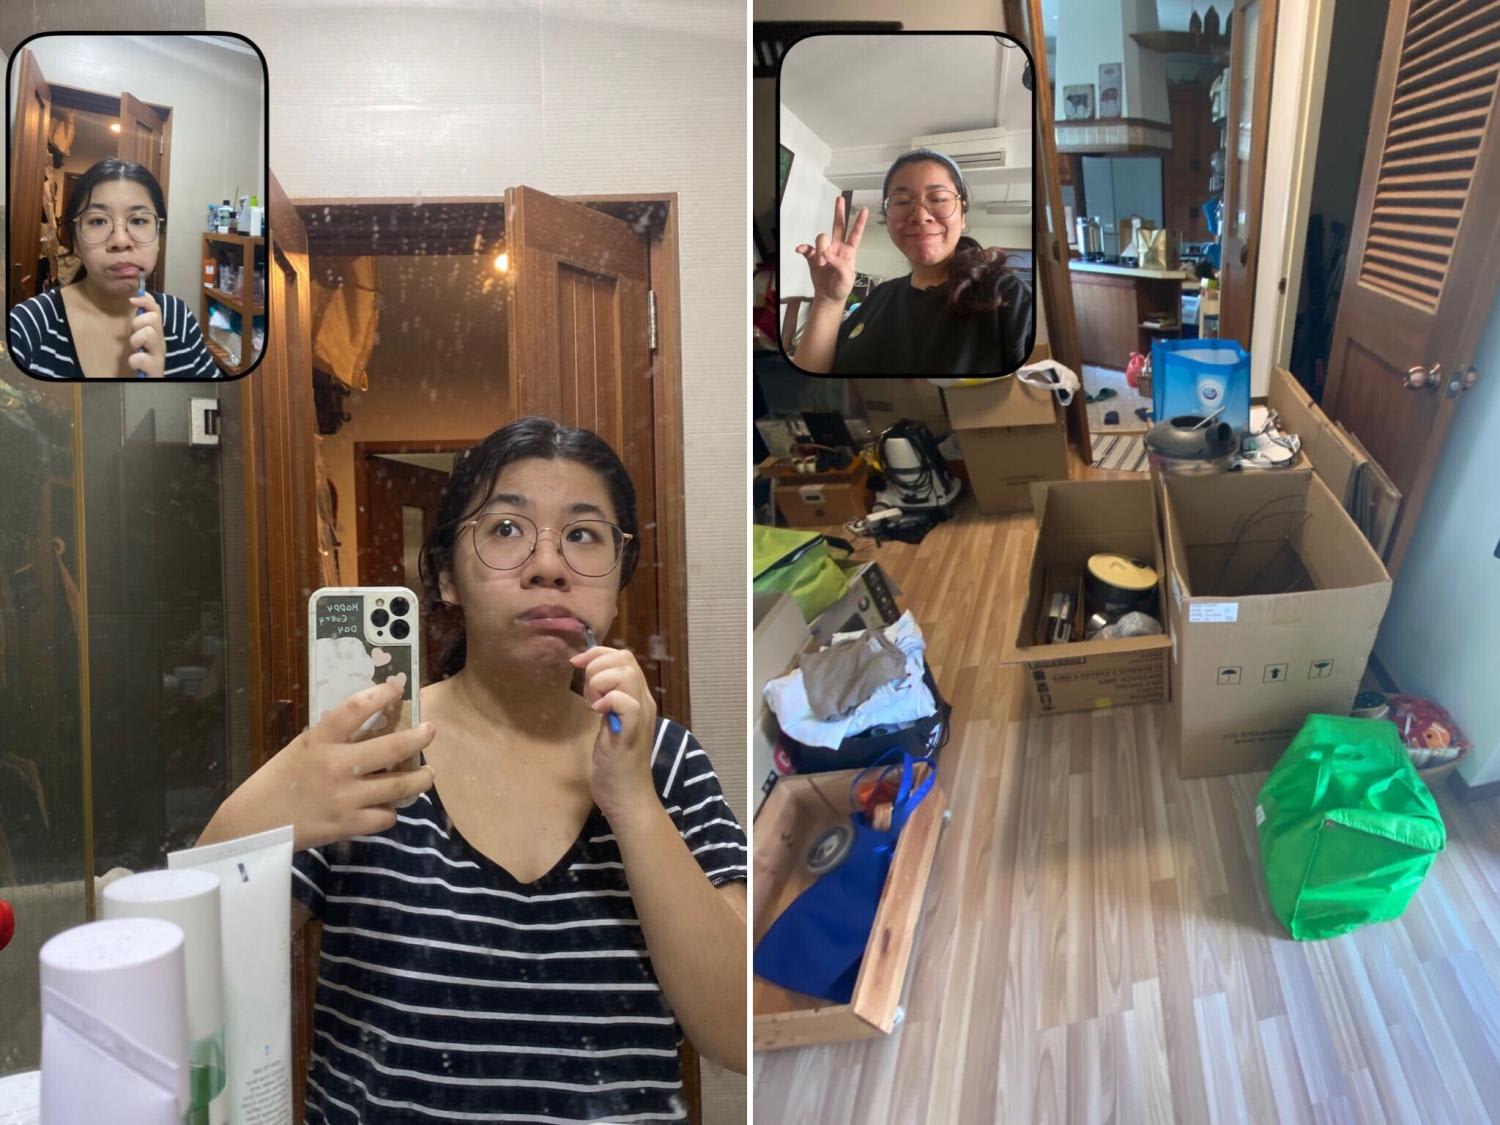 TODAY journalist Loraine Lee had to snap photos of herself brushing her teeth and packing up in her parents' home for a move when she started using the BeReal application.